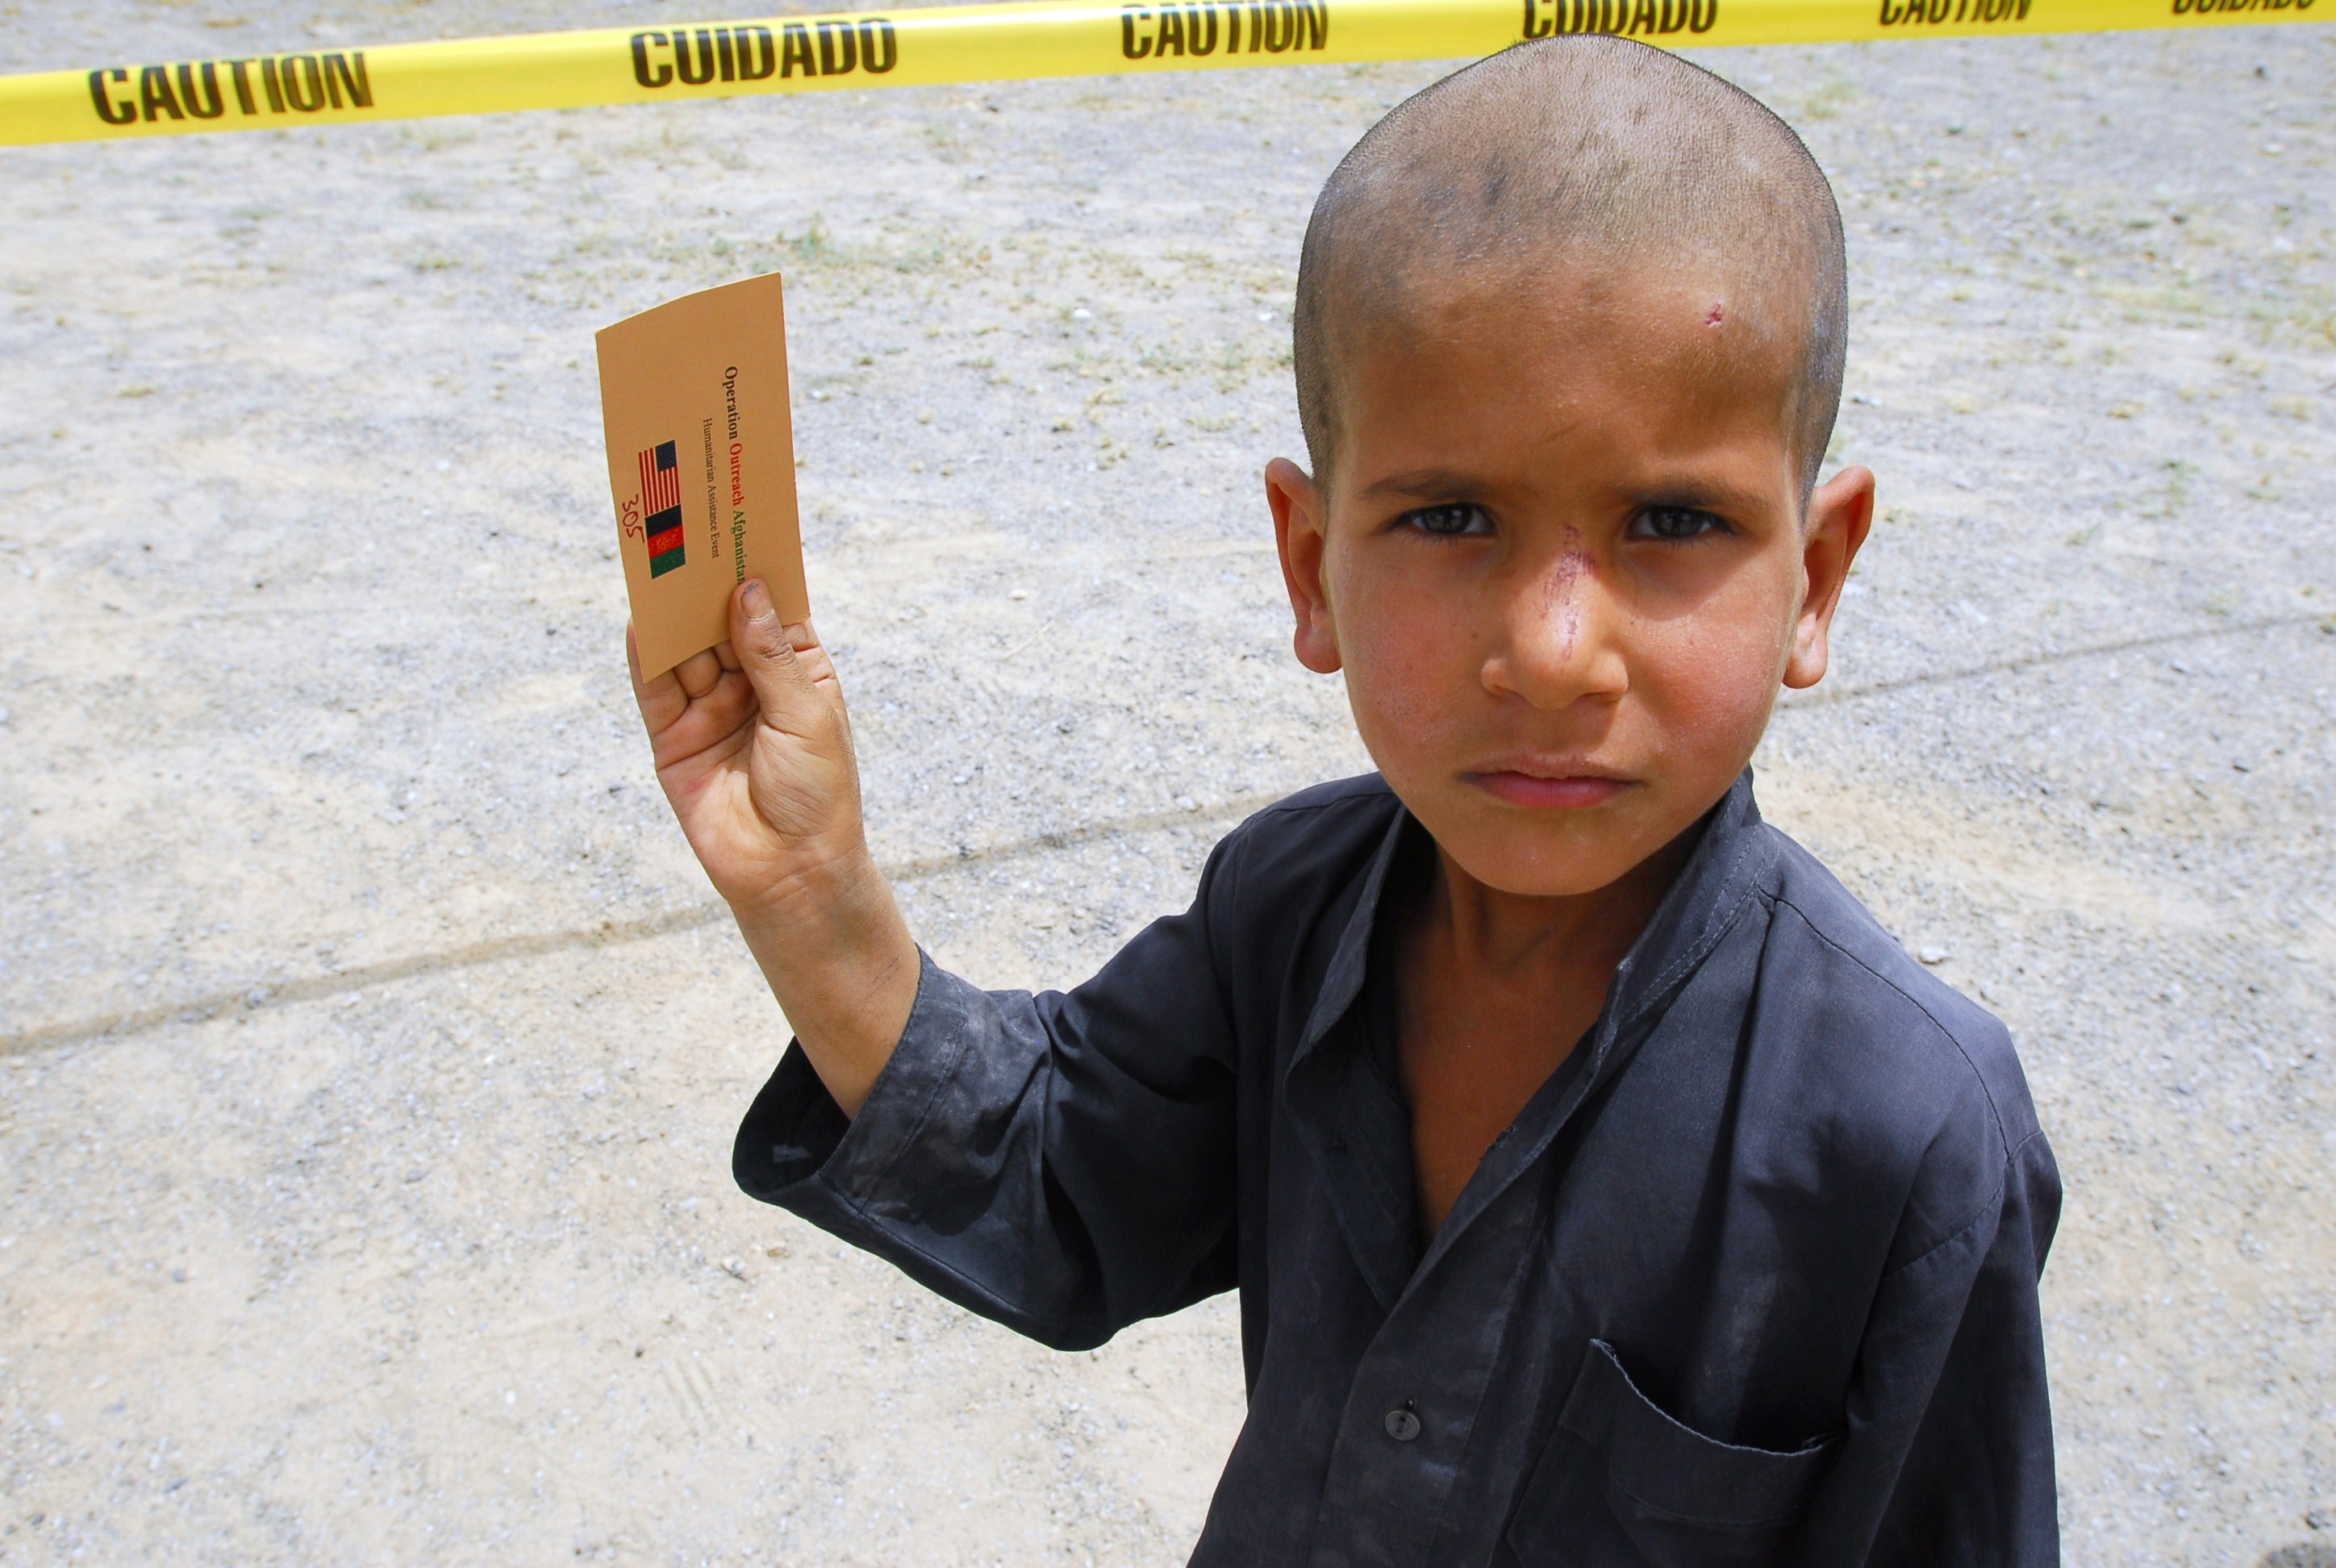 Afghan Boy Holds Up Ticket for Humanitarian Aid Drop With South Carolina Guardsmen DVIDS300691